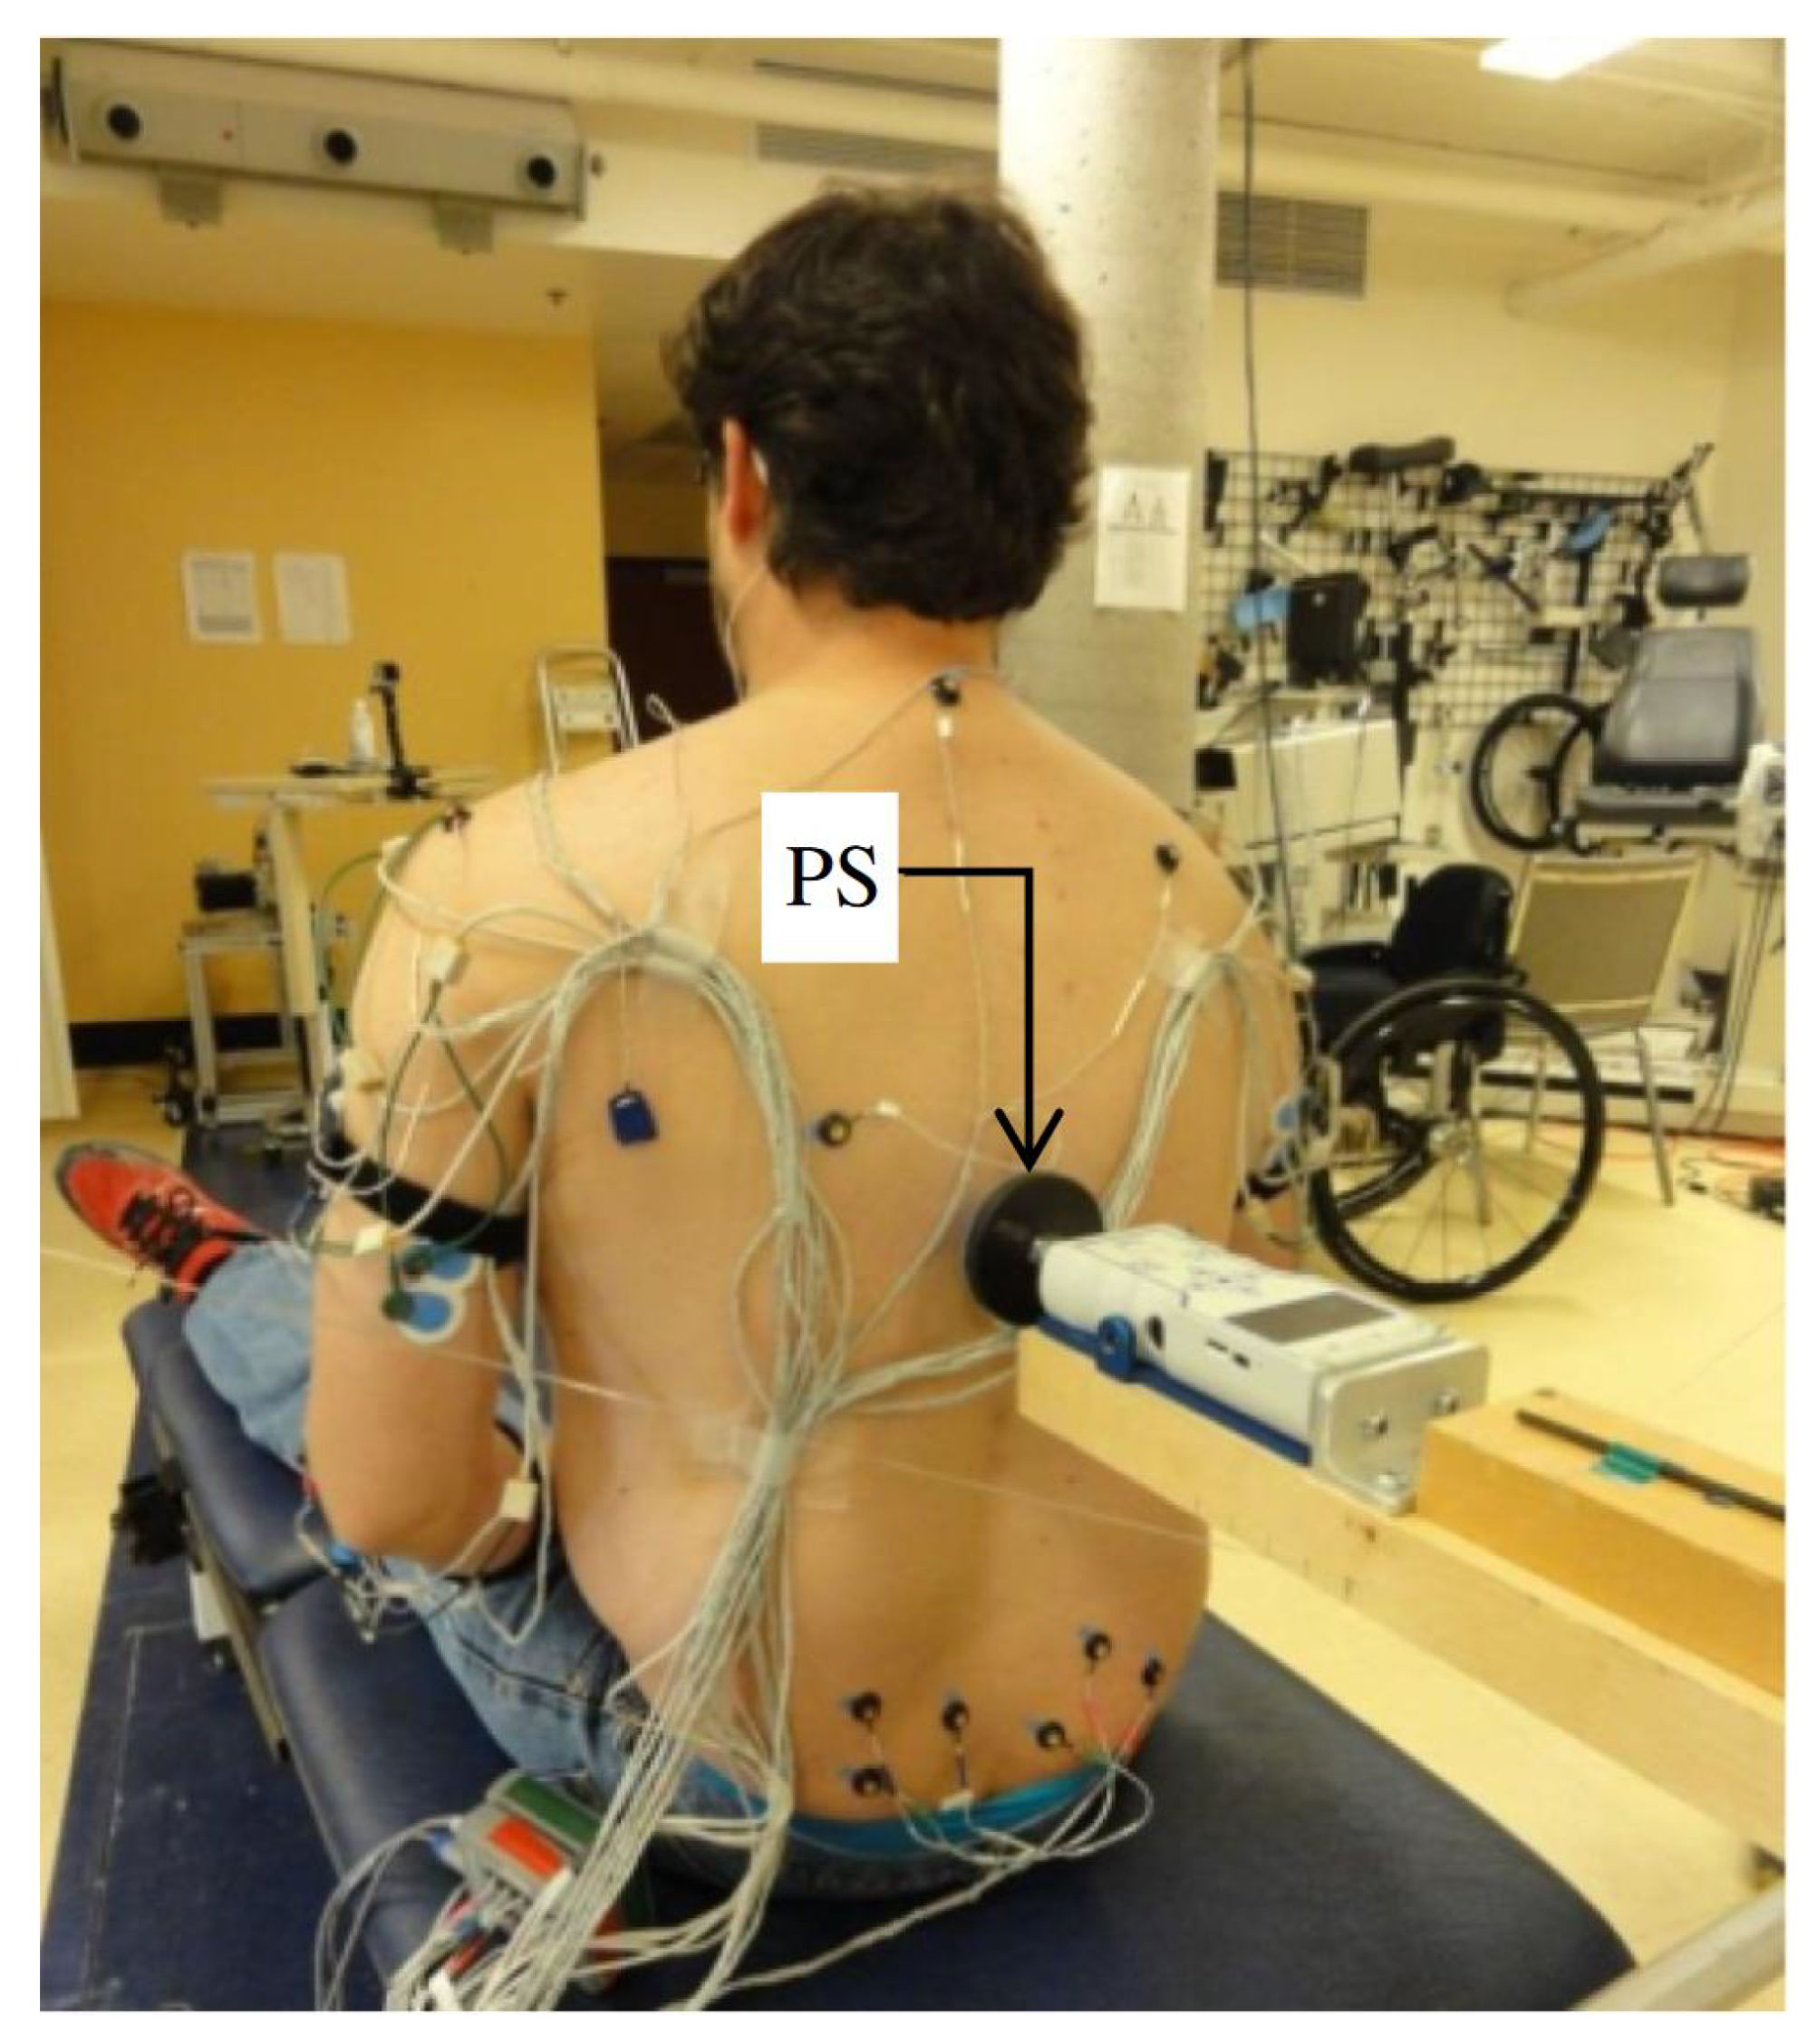 Sensors Free Full-Text Sensorimotor Time Delay Estimation by EMG Signal Processing in People Living with Spinal Cord Injury